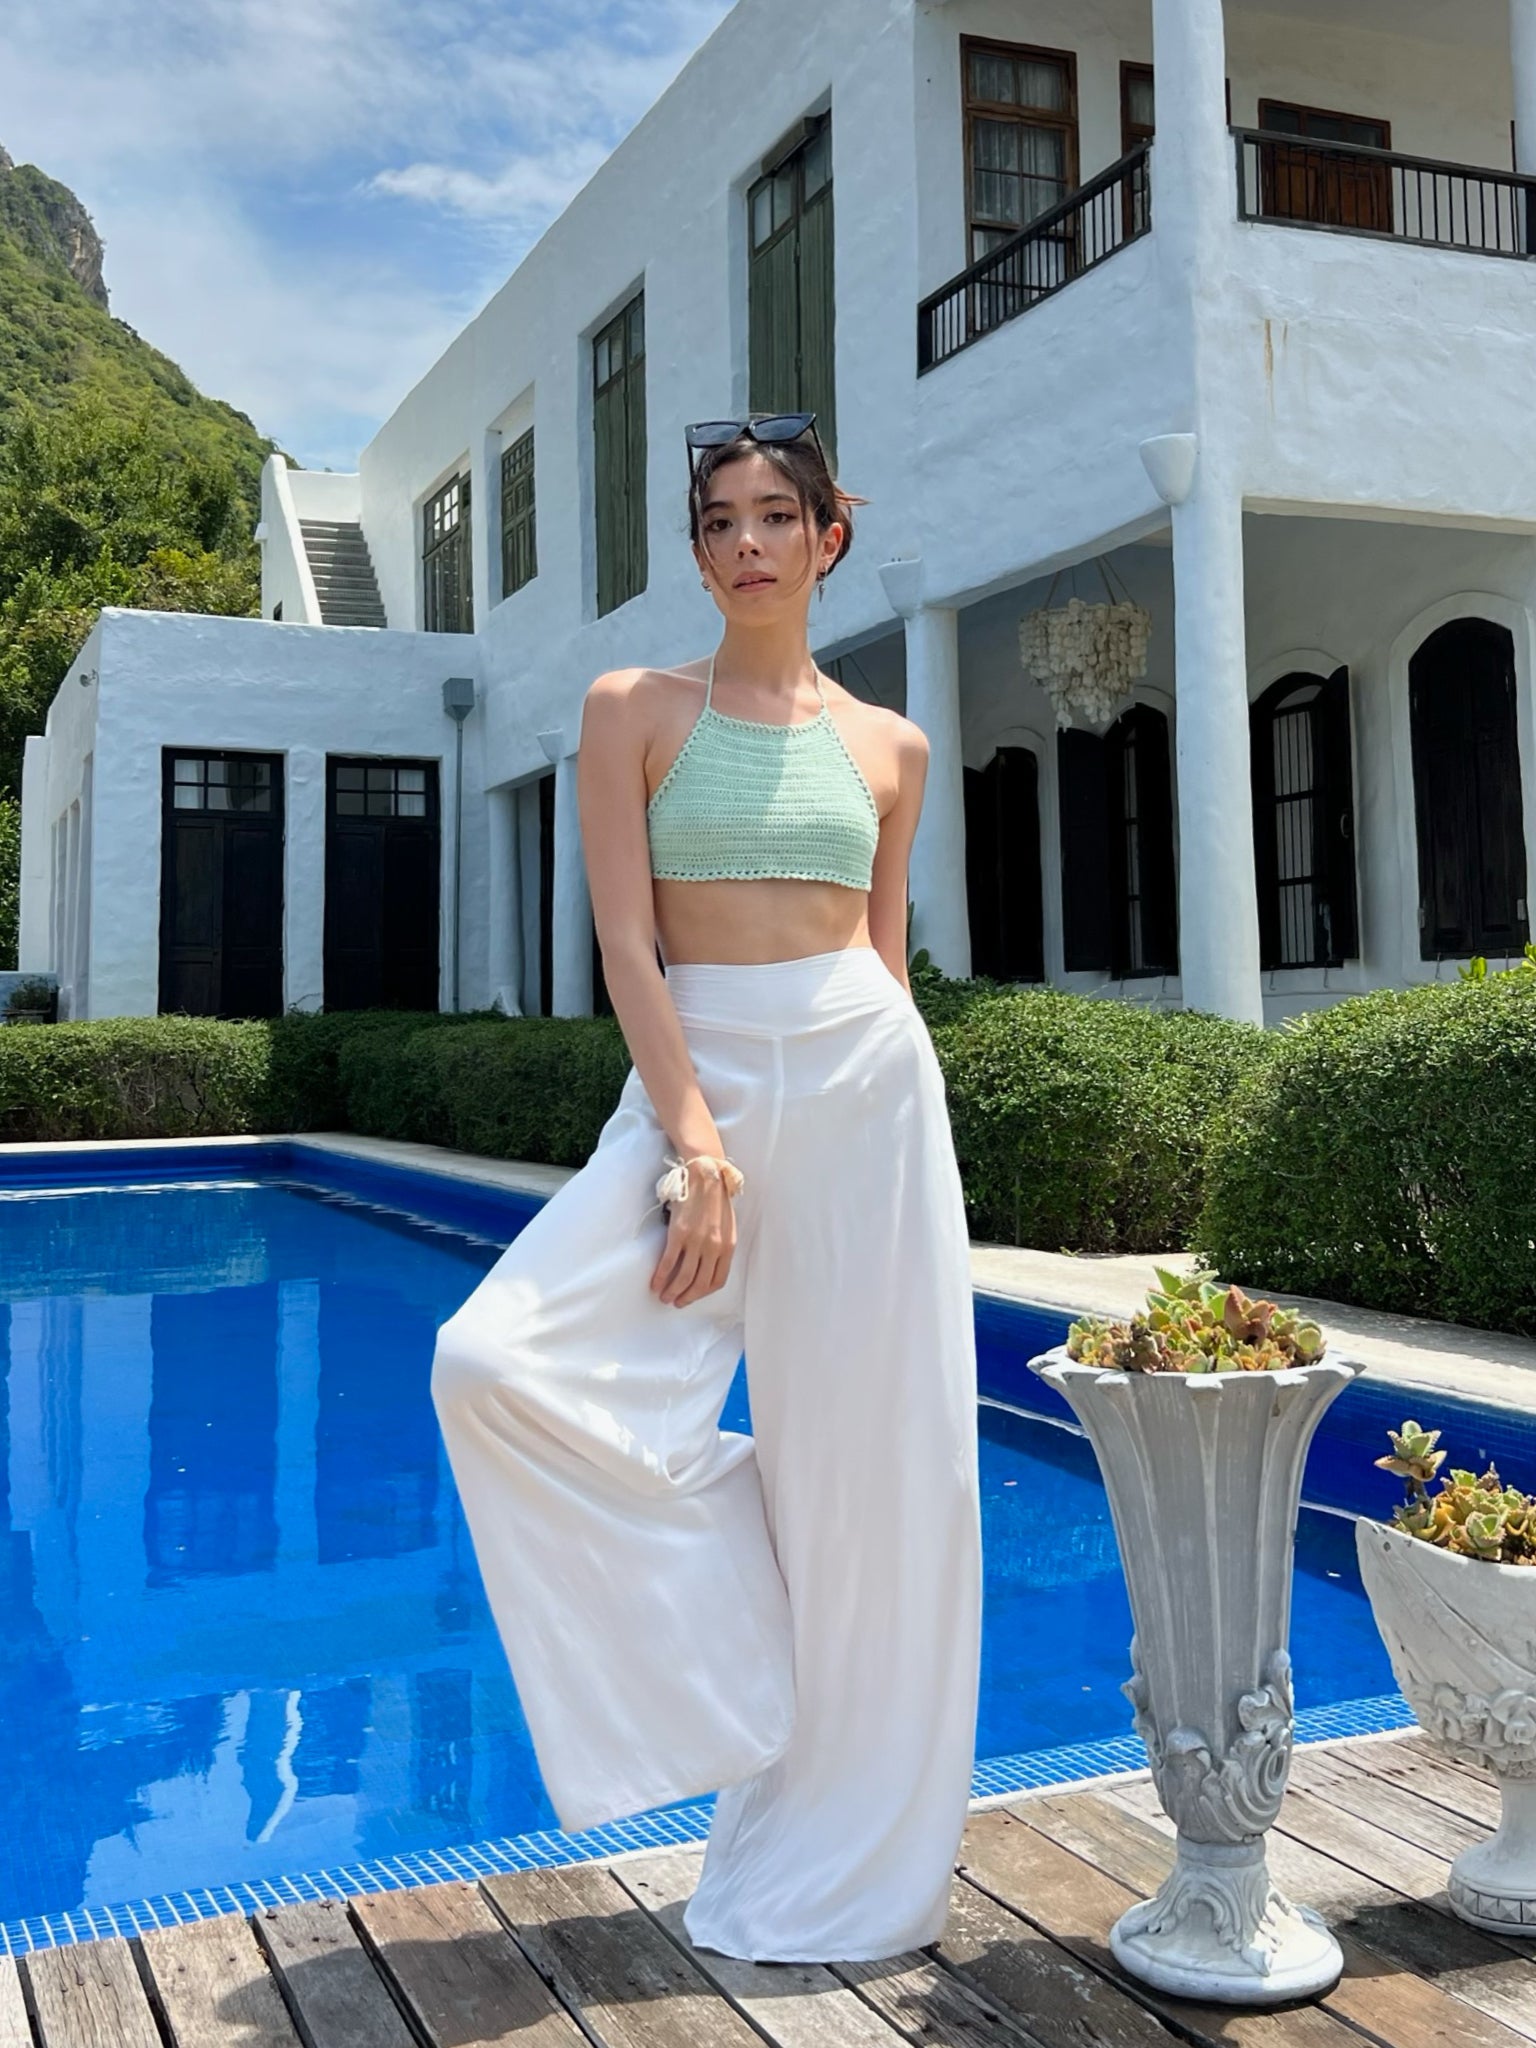 Take your Bech vacation style to the next level with out stylish white wide leg pants, perfect for everyday vacay